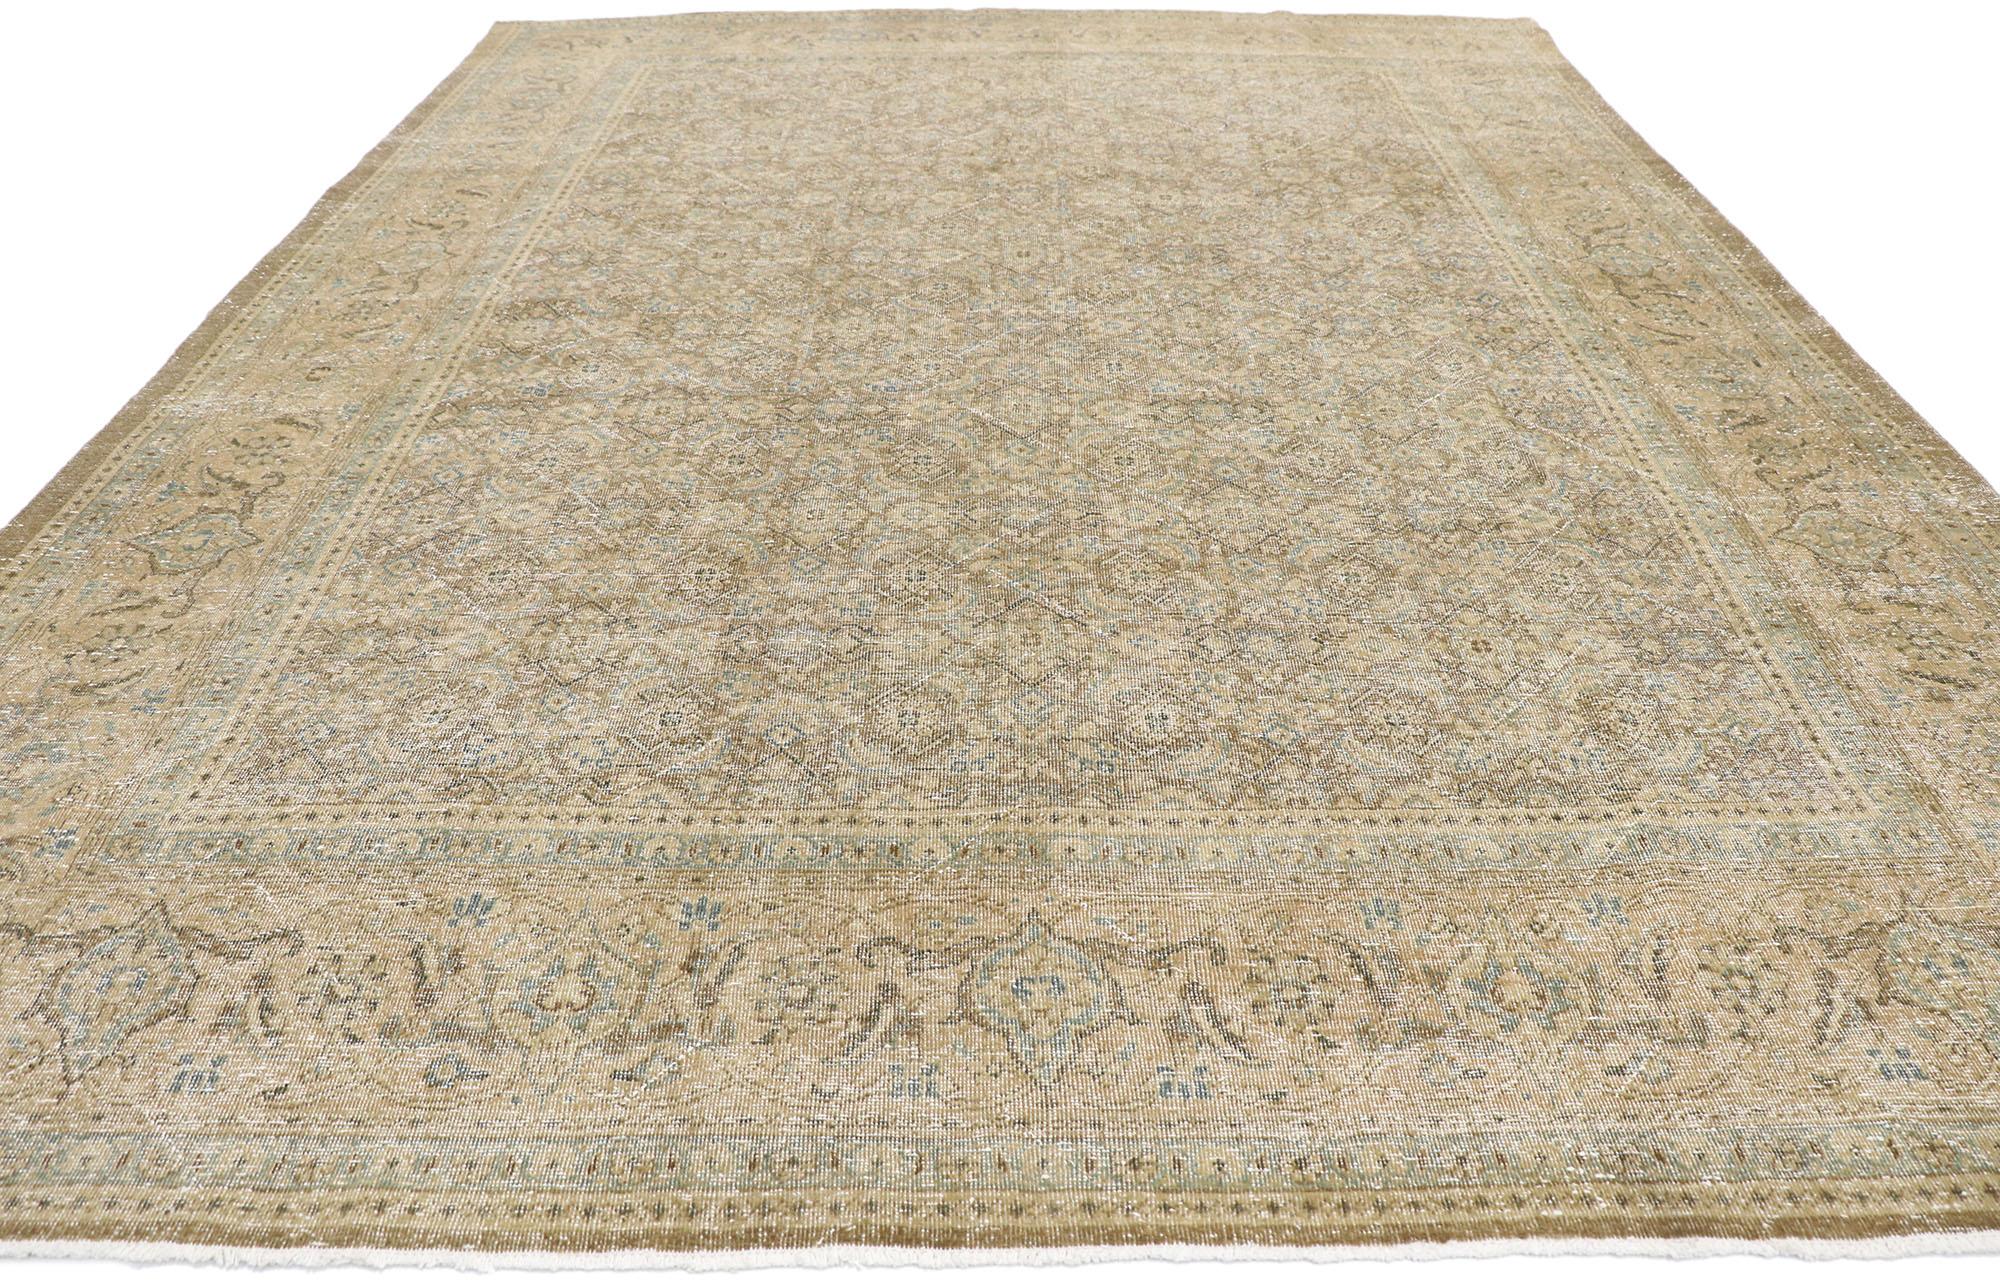 Tabriz Distressed Antique Persian Mahal Rug with Modern Rustic Shaker Style